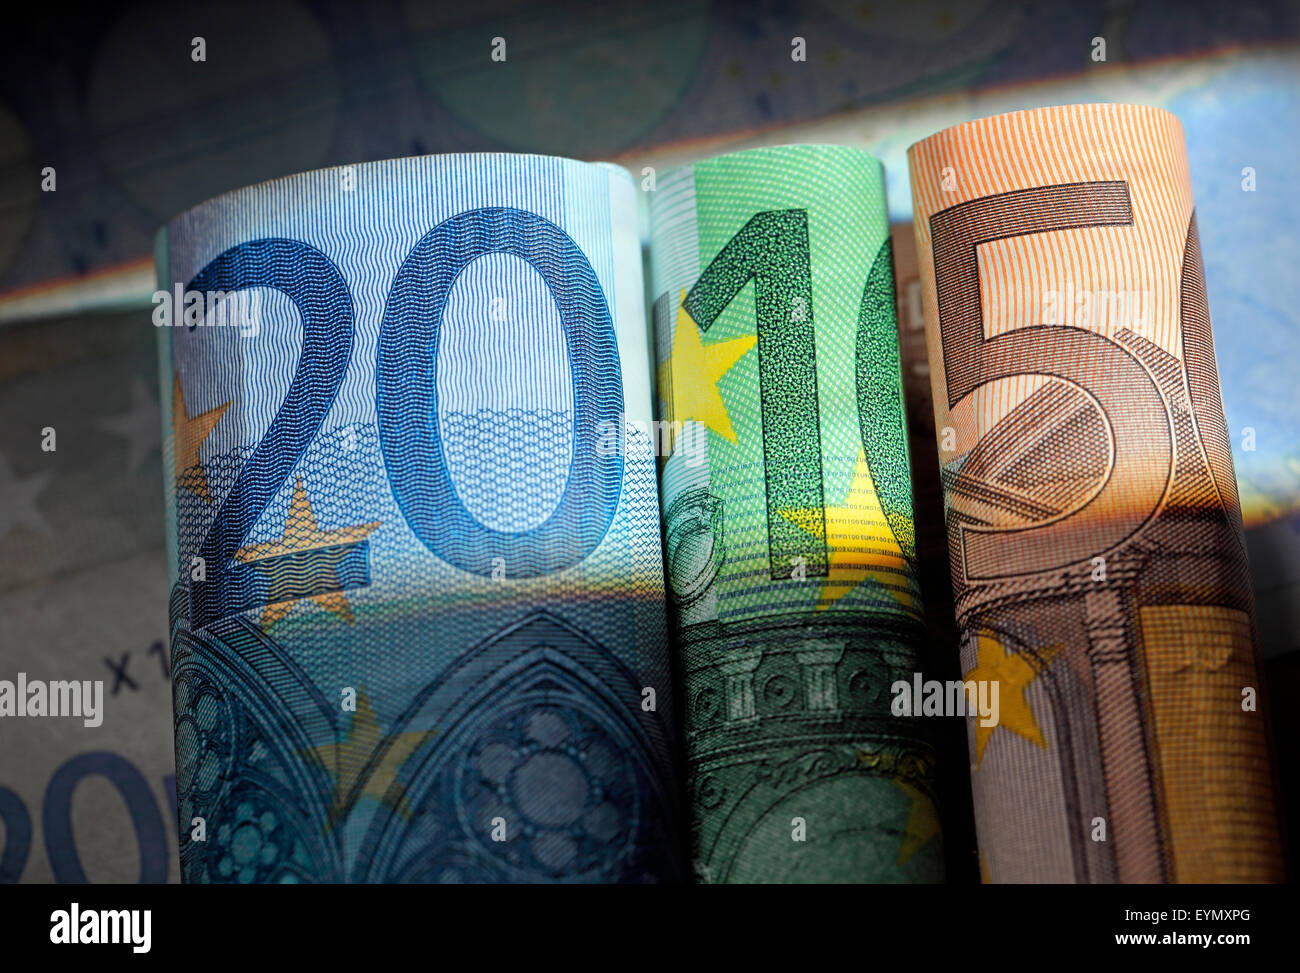 Number 2015 made of 20 euro, 100 euro and 50 euro bills. Stock Photo